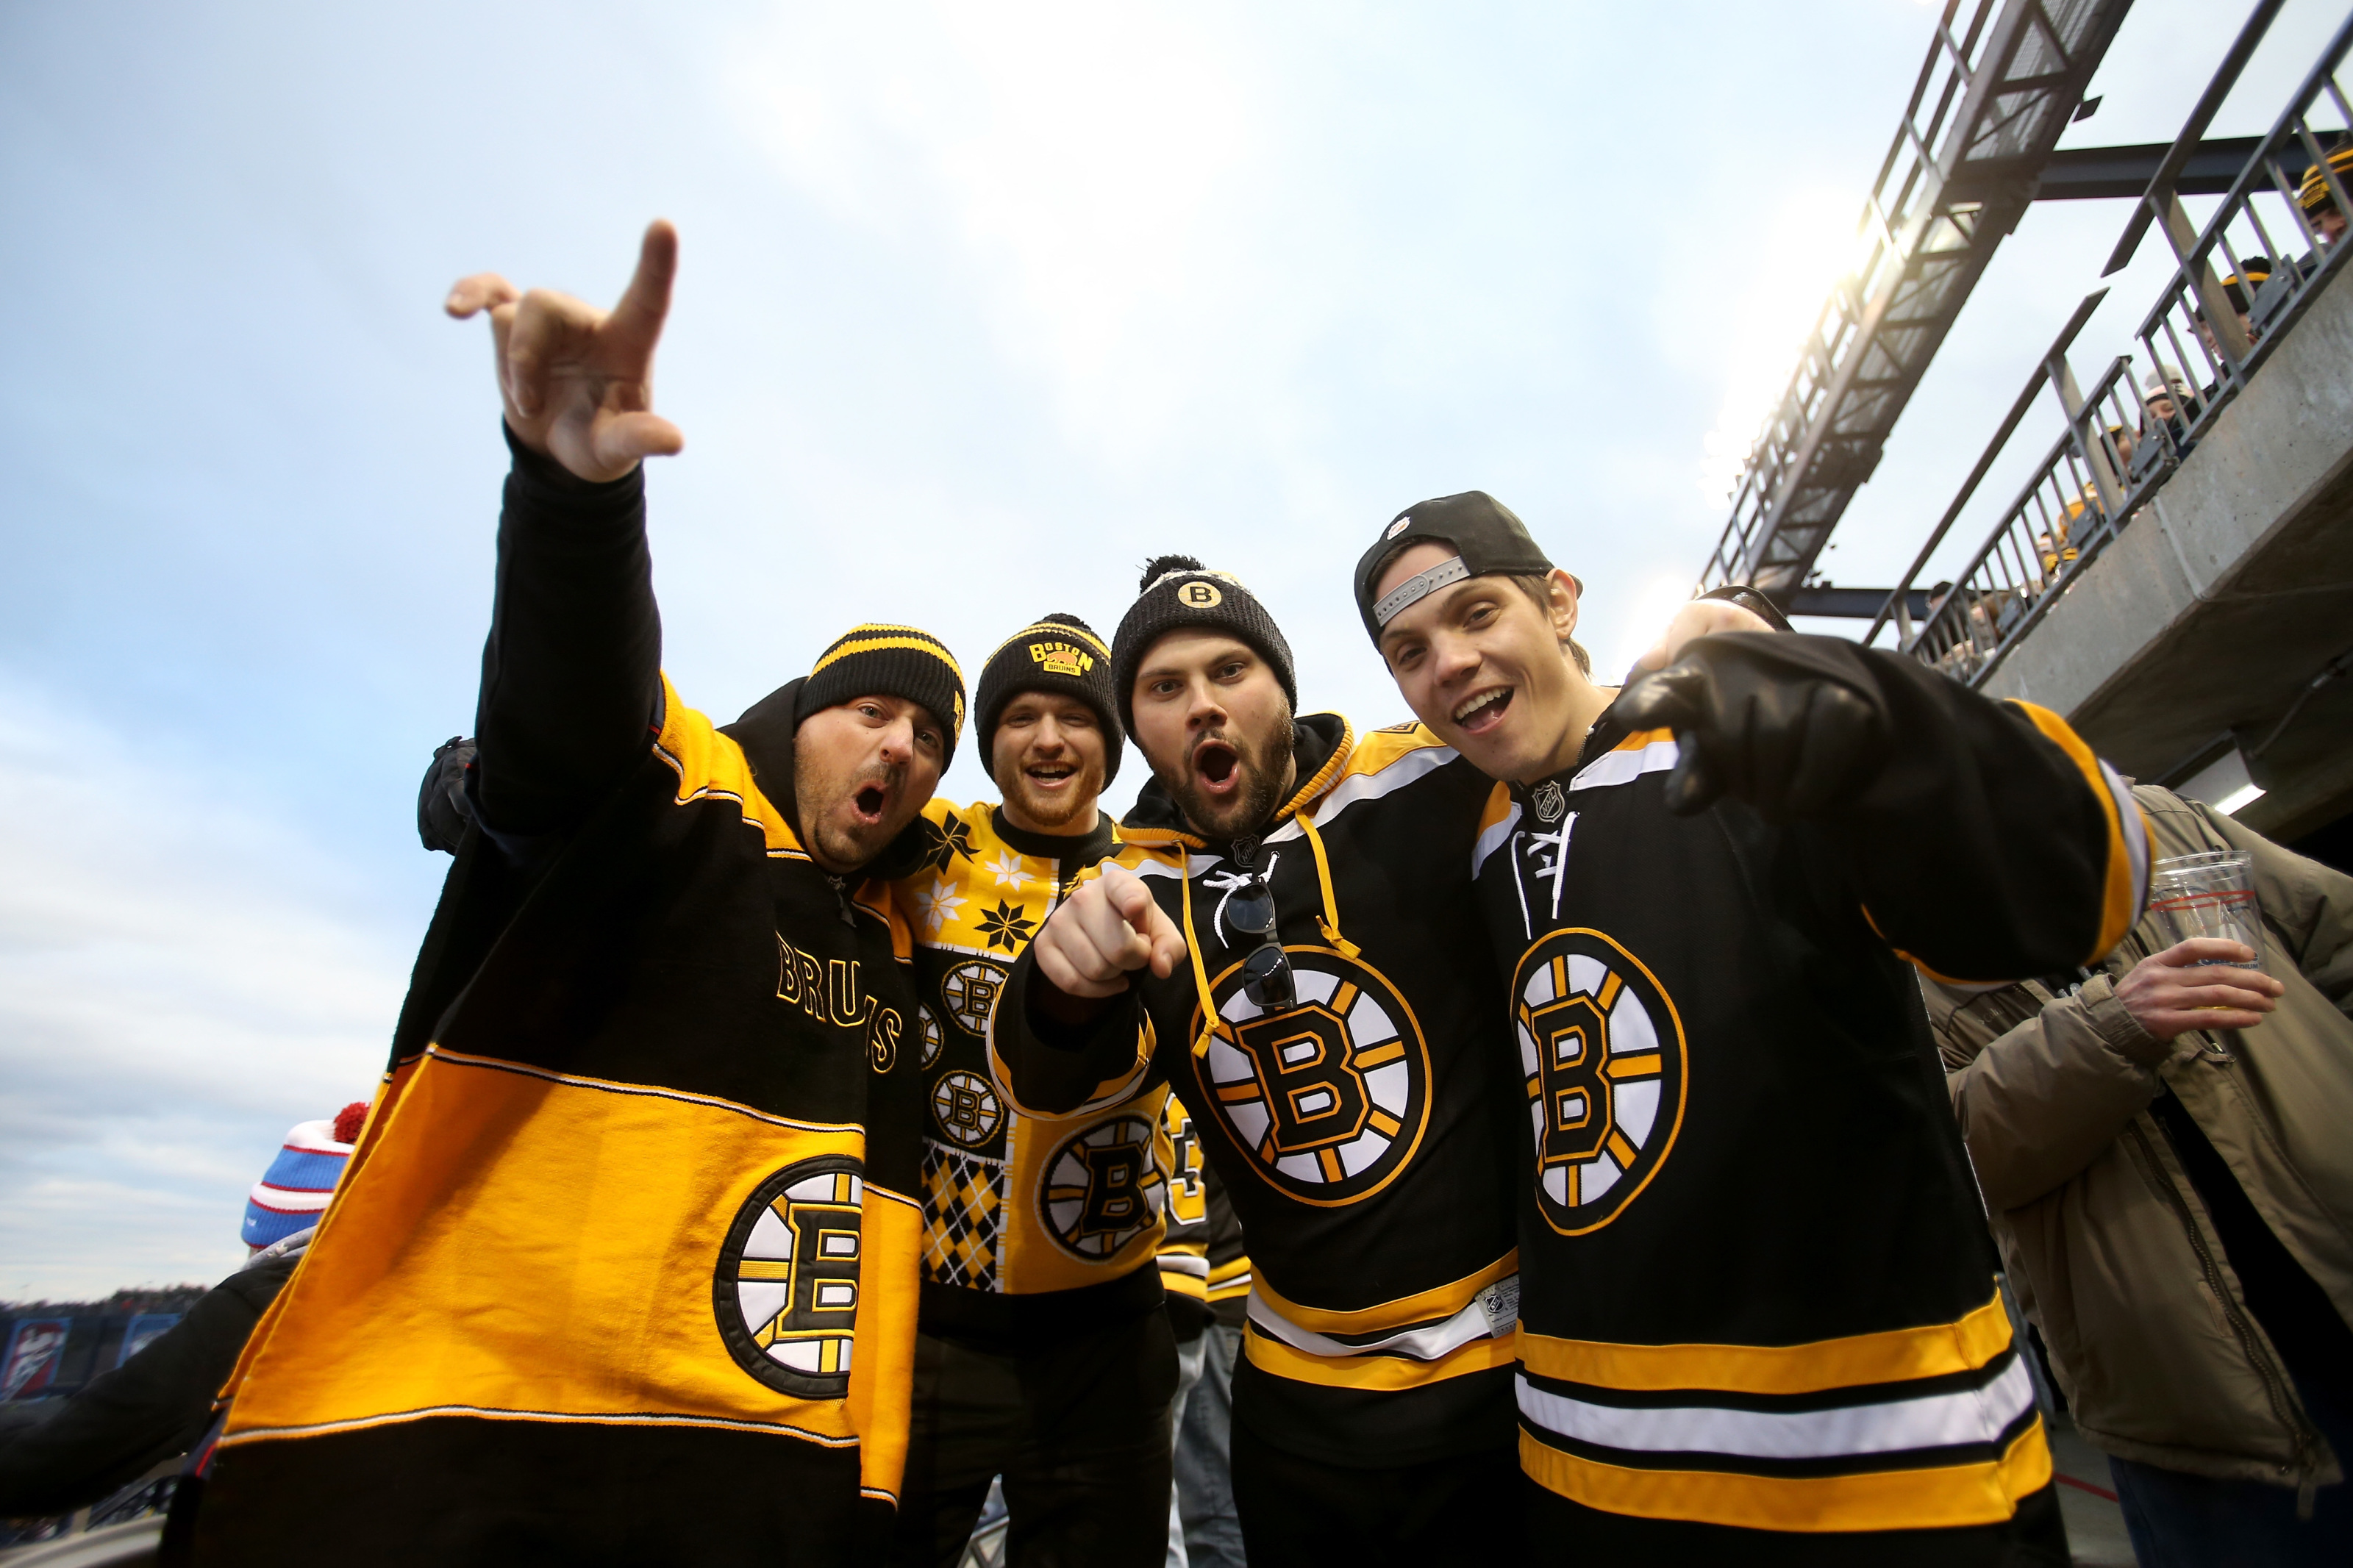 Bruins Winter Classic sweater leaks several days early - Stanley Cup of  Chowder